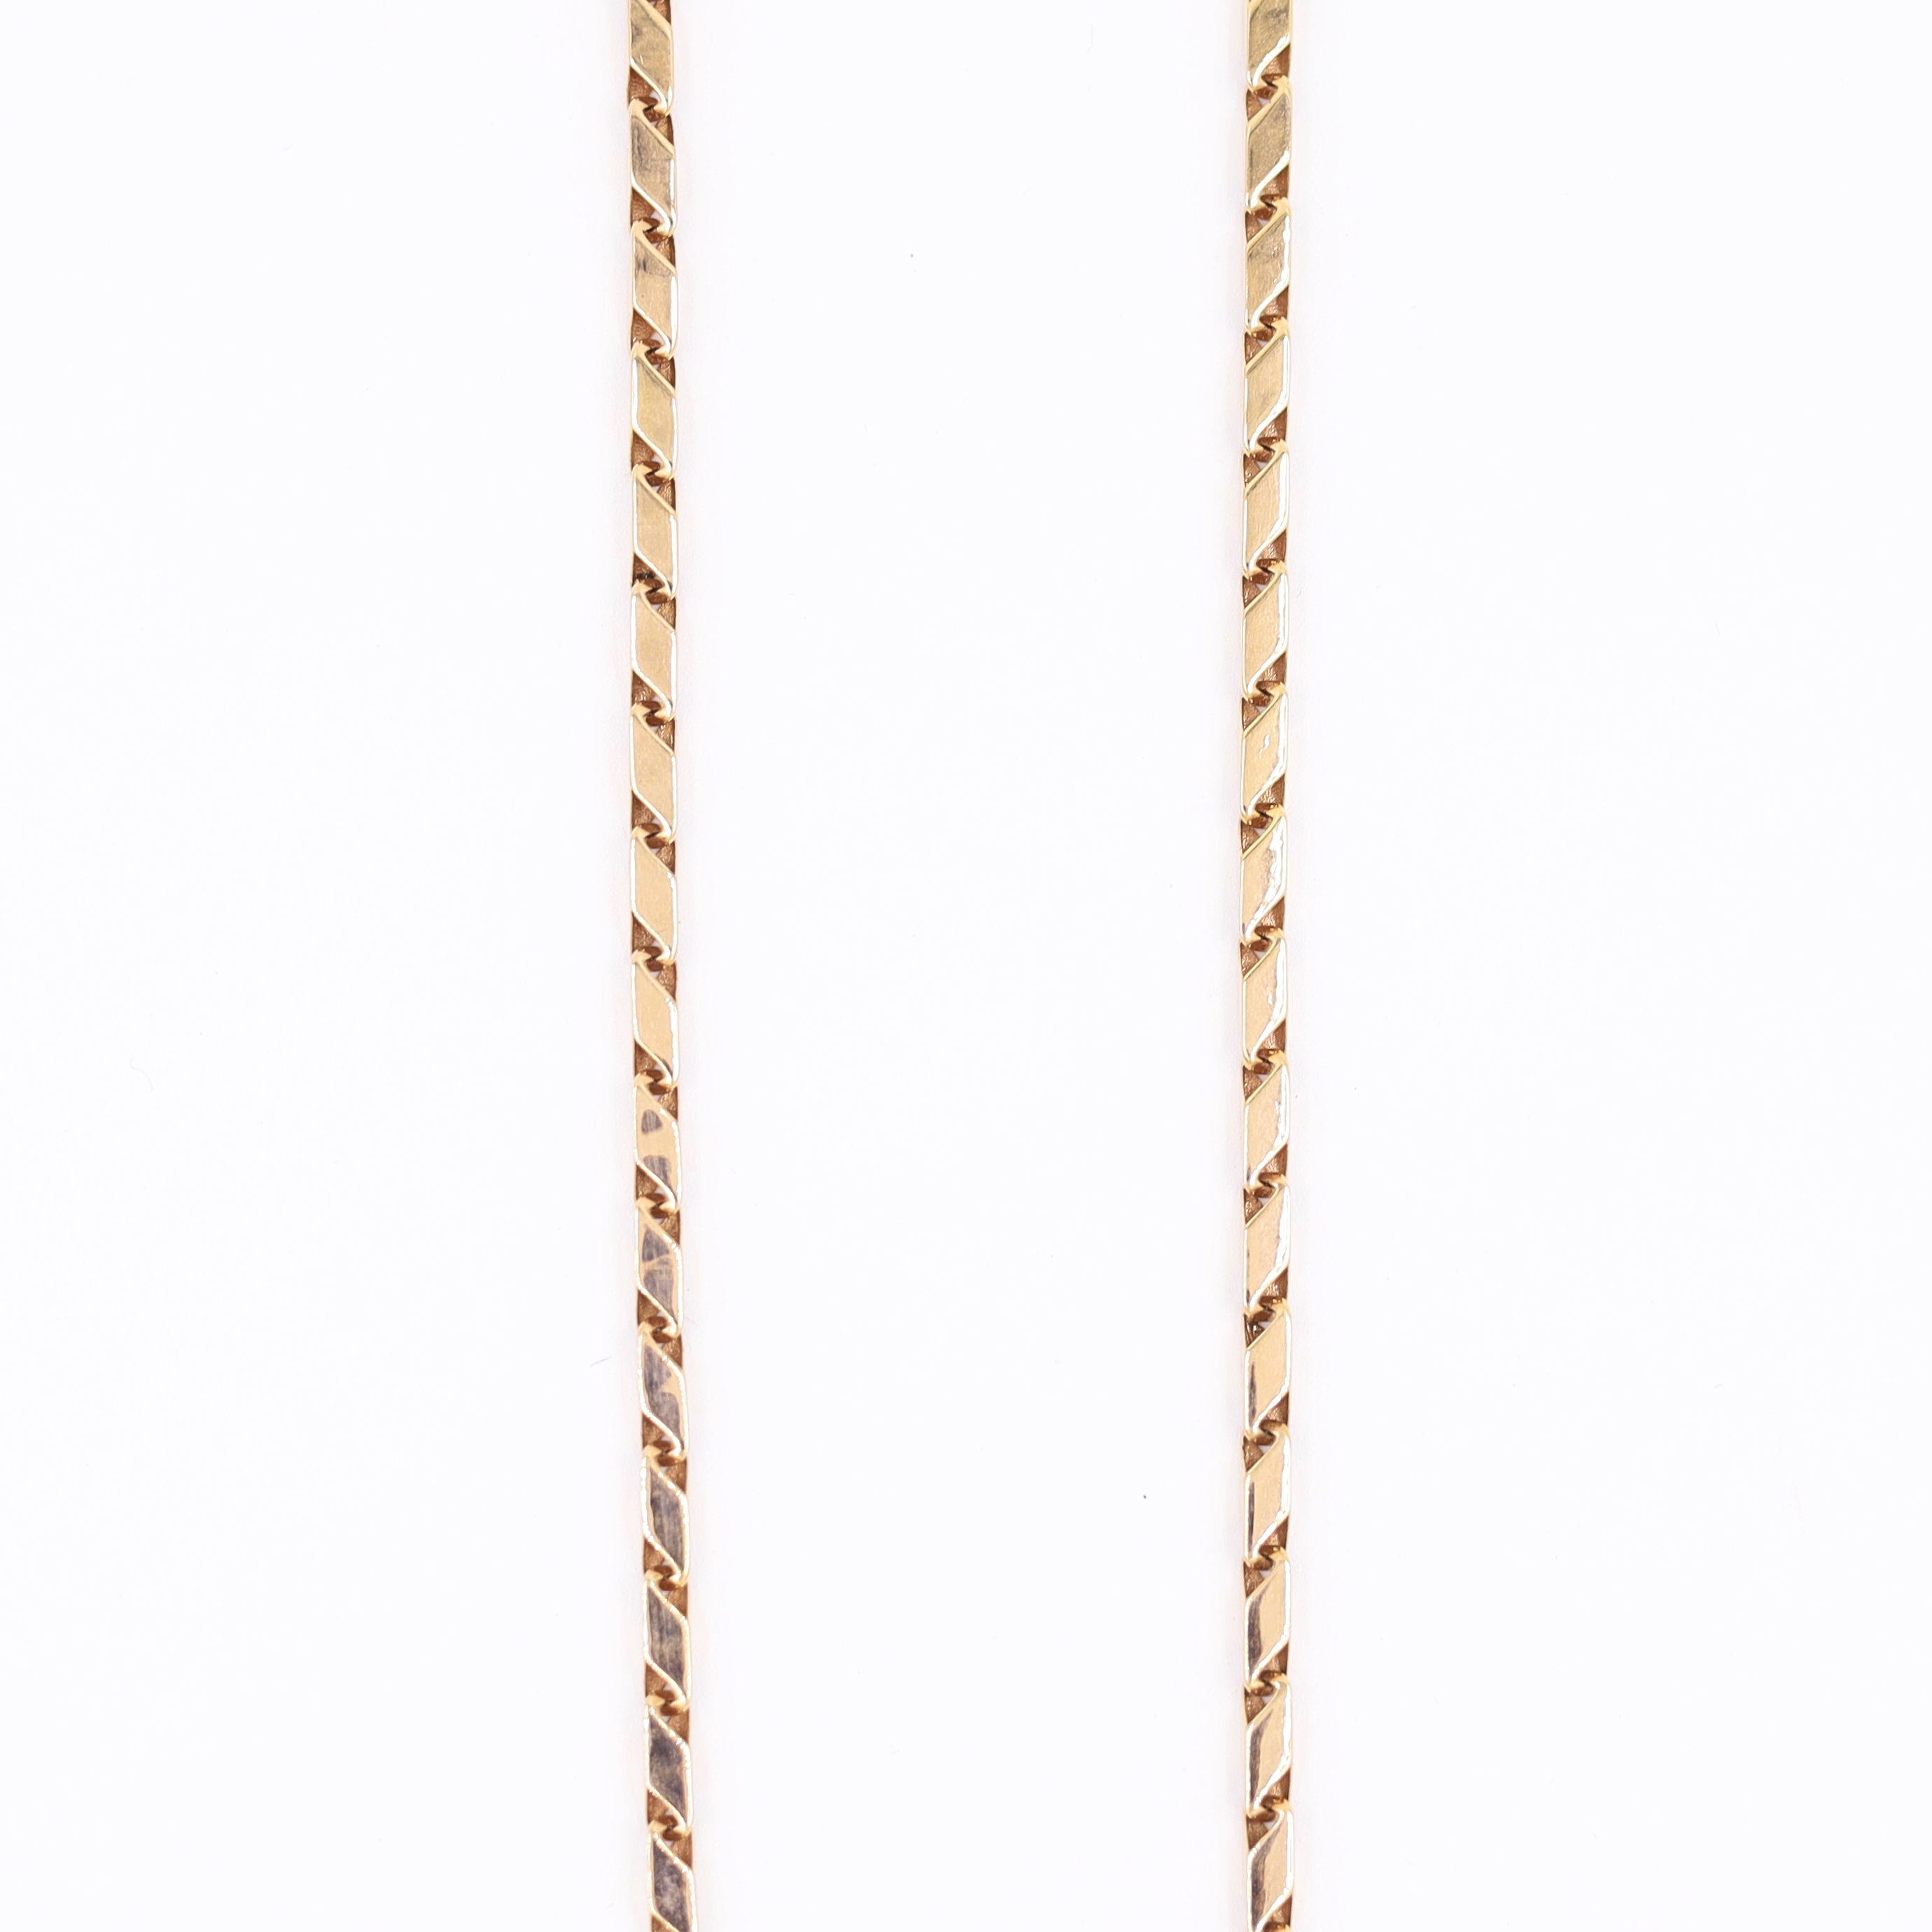 Buy quality Pattern carved single tone gold chain for men in Surat